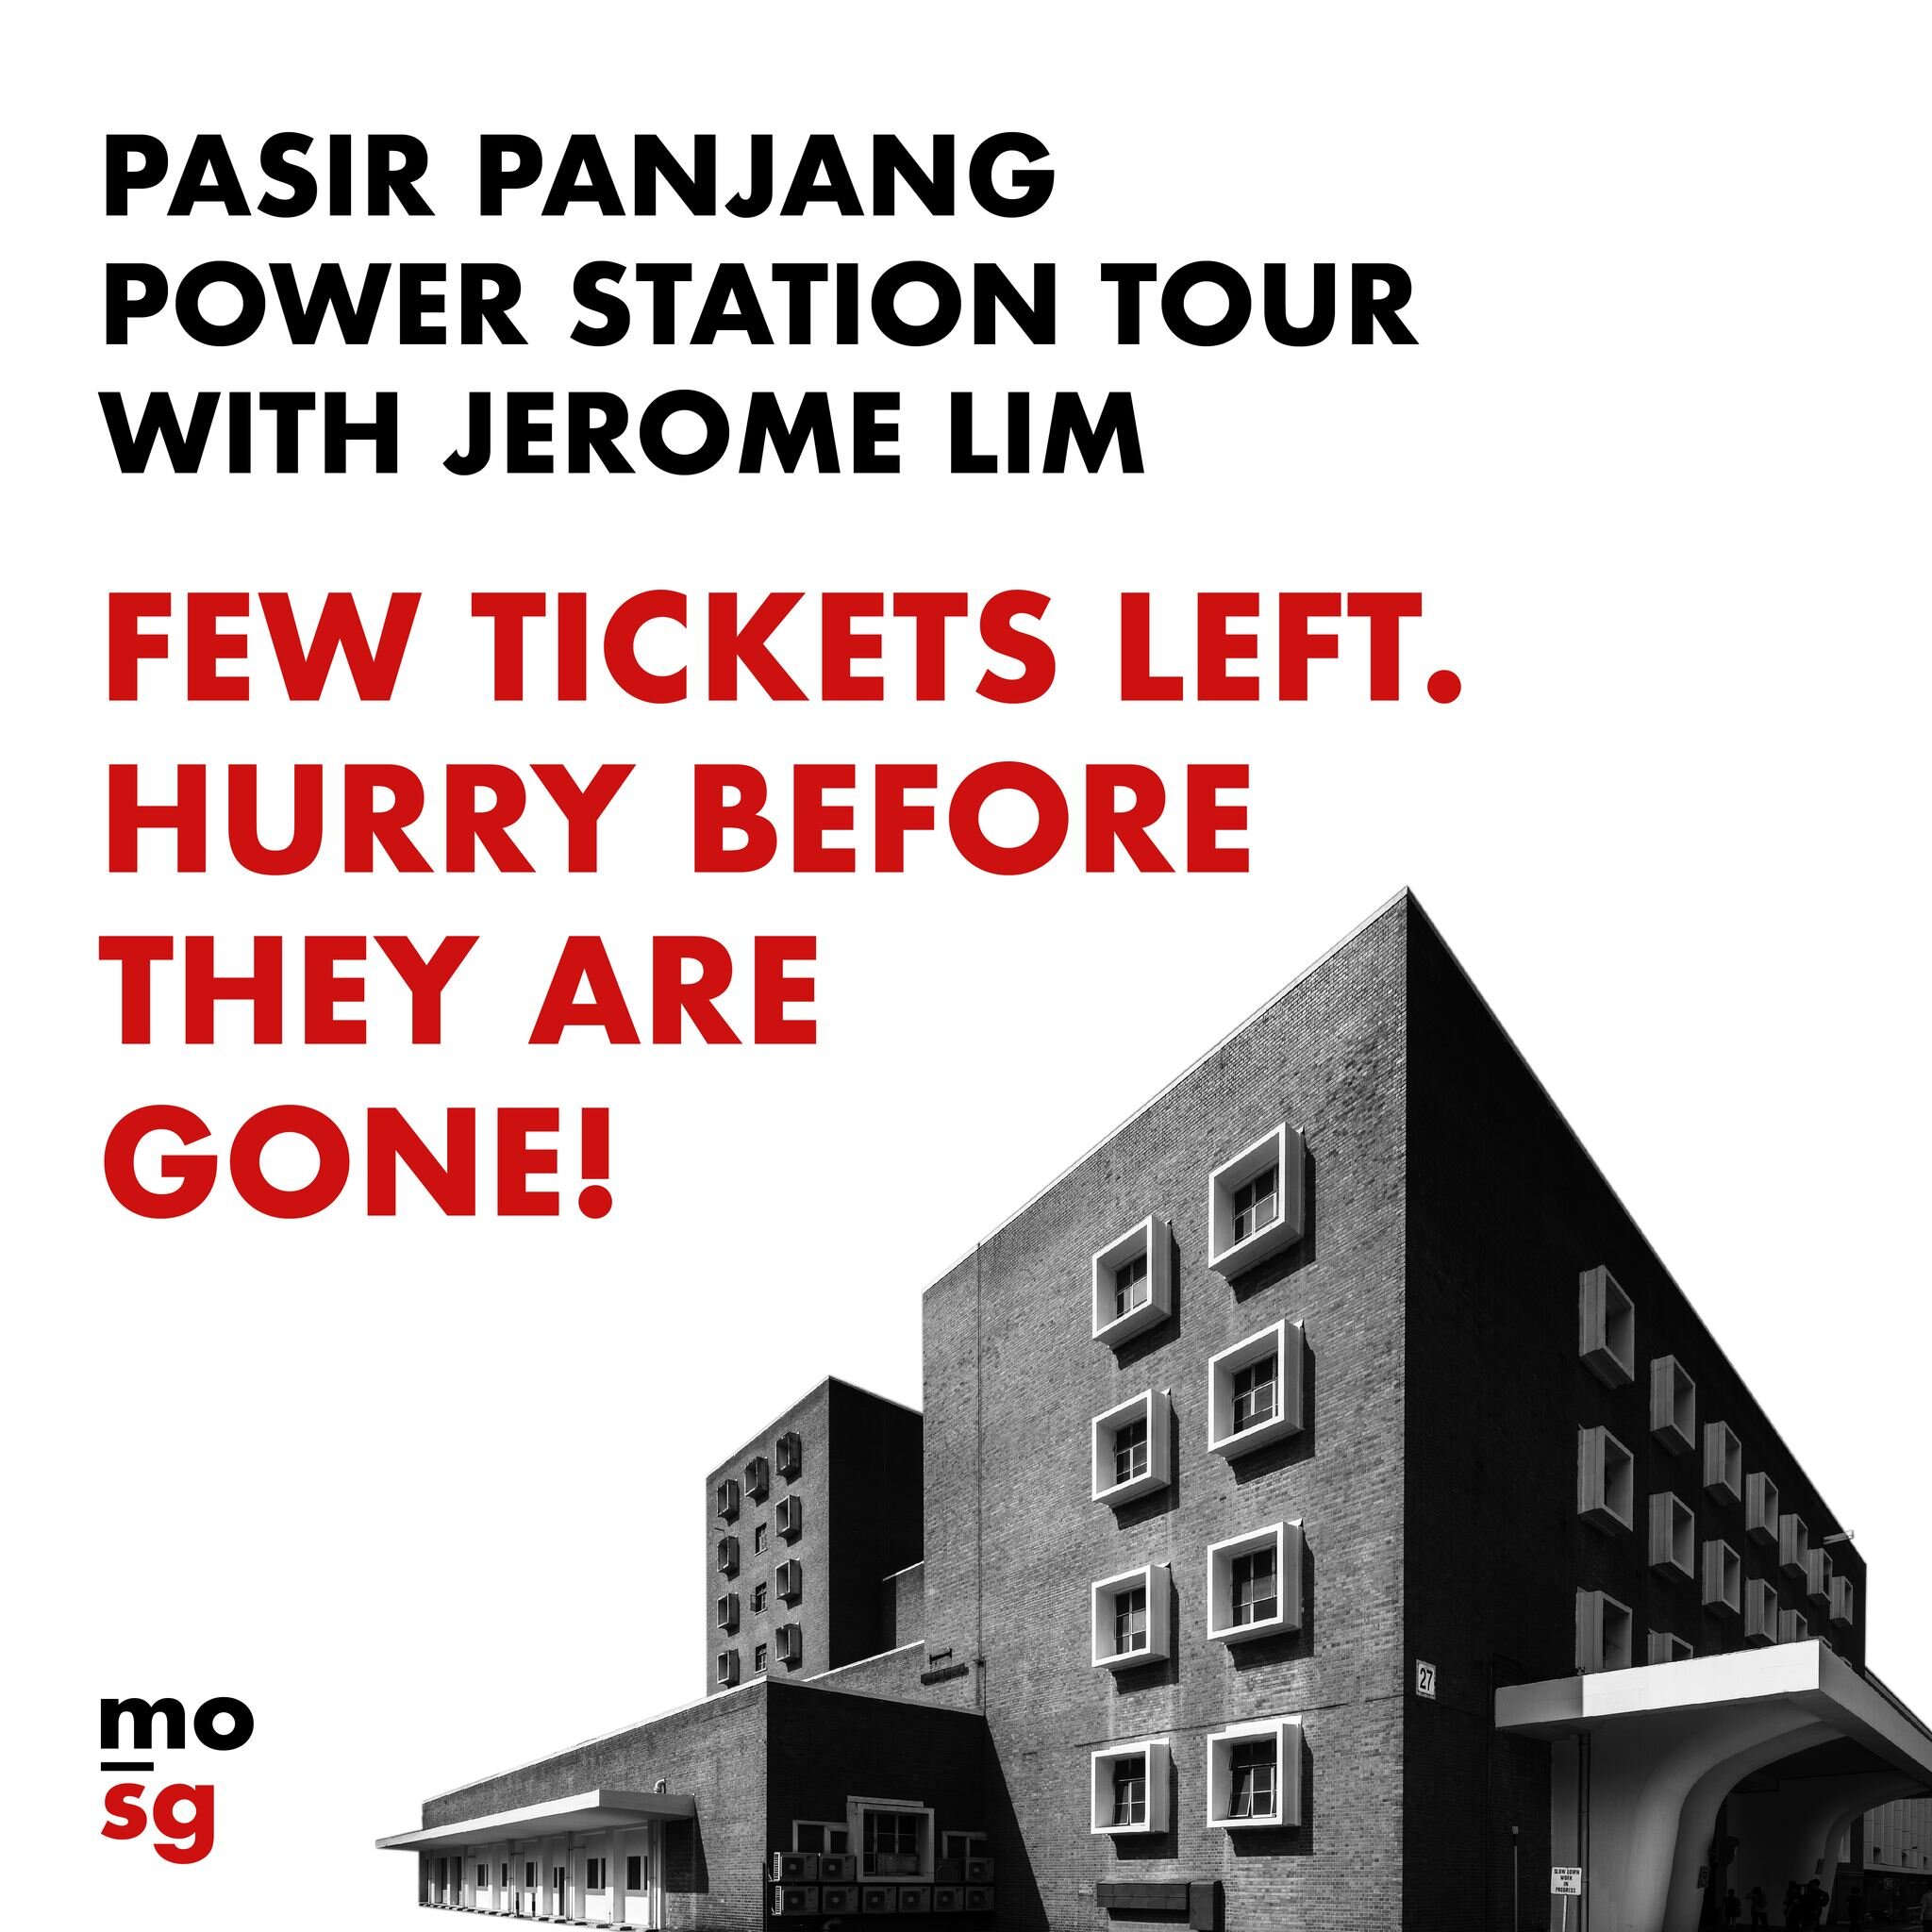 Event is happening on 25 February. Only a few tickets left. Hurry and get them before they are gone. Link in profile.

#docomomosg #architecture #modernism #singapore #singaporeheritage